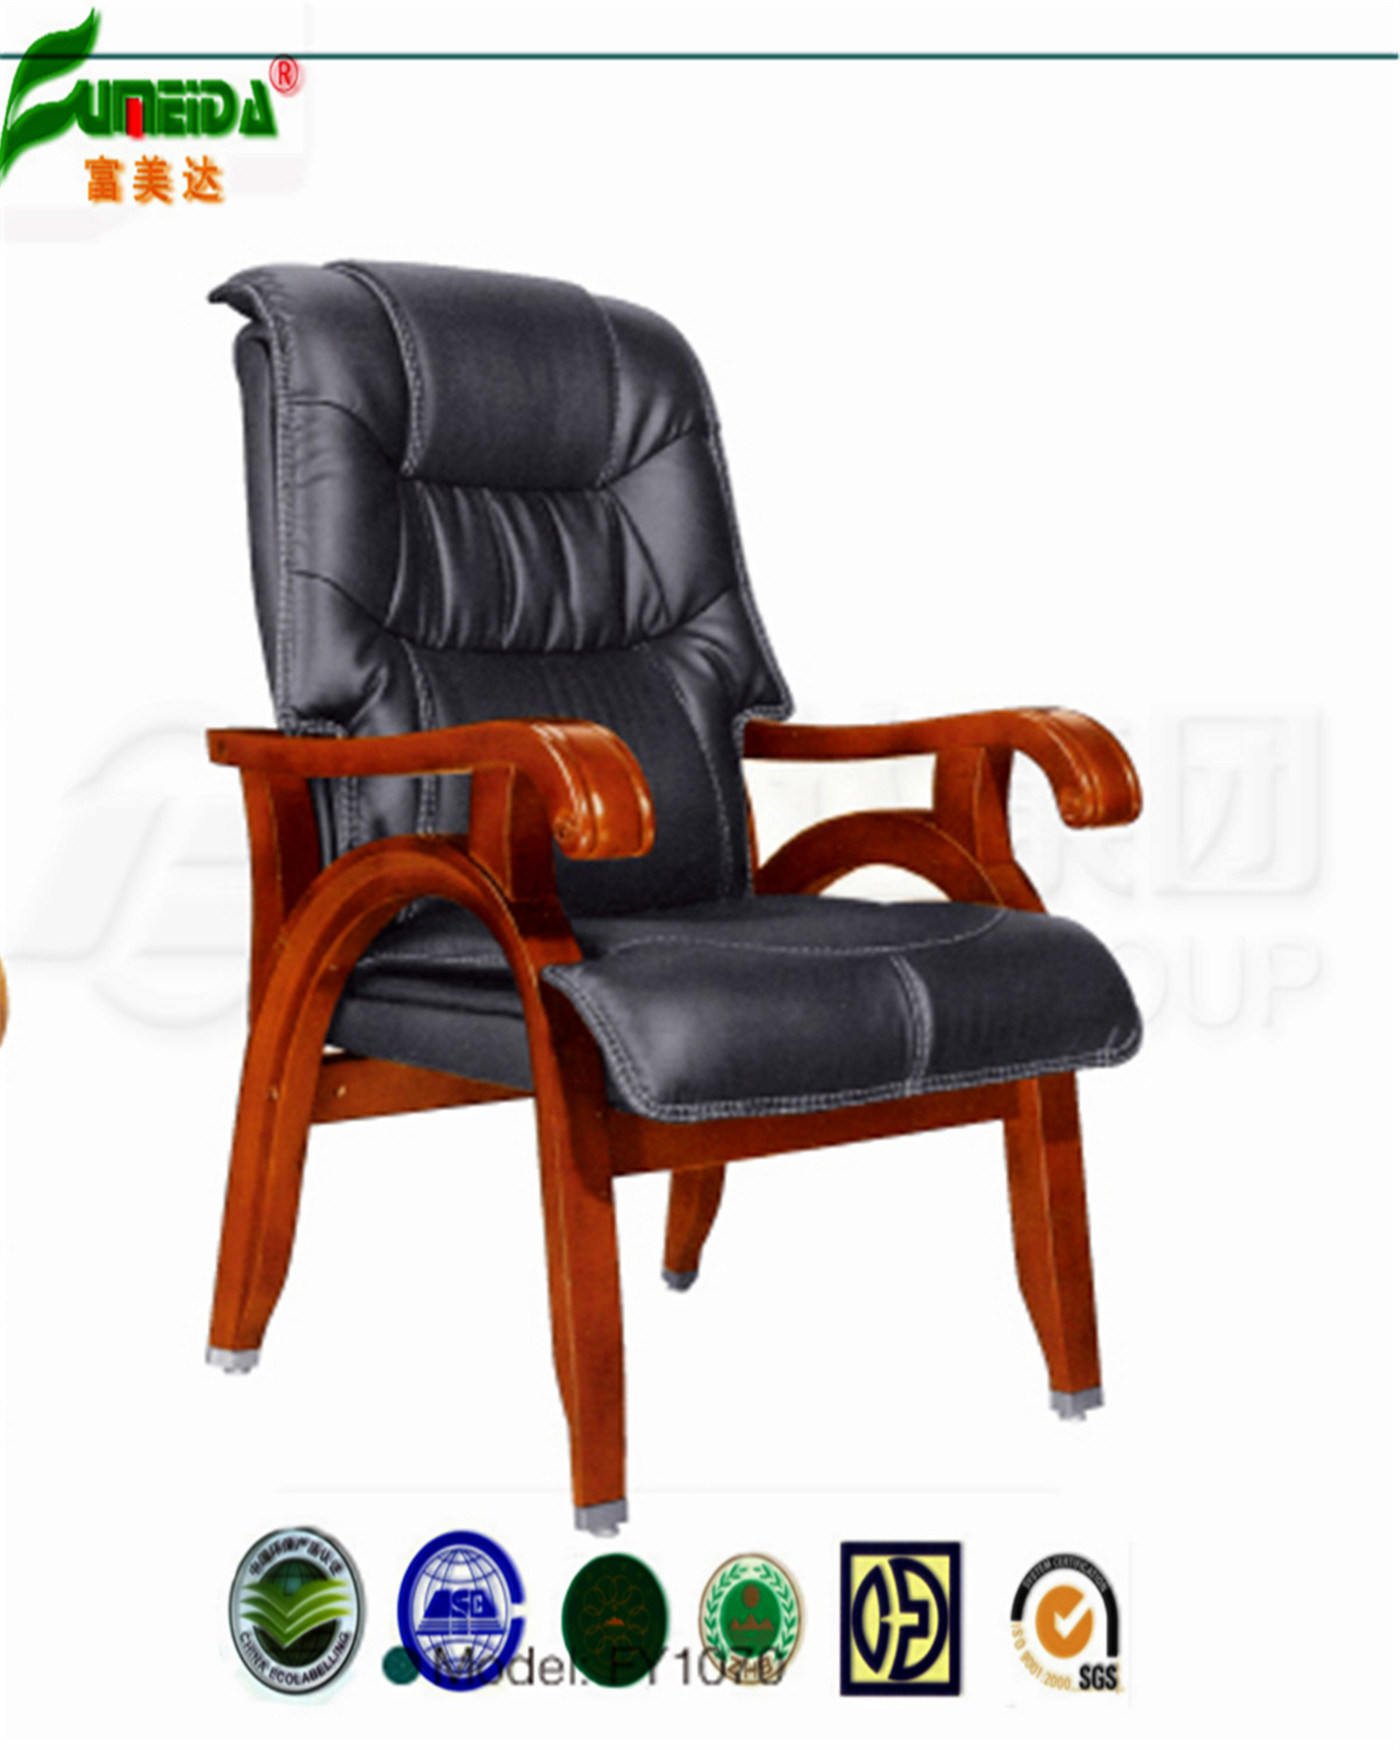 Leather High Quality Executive Office Meeting Chair (fy1070)